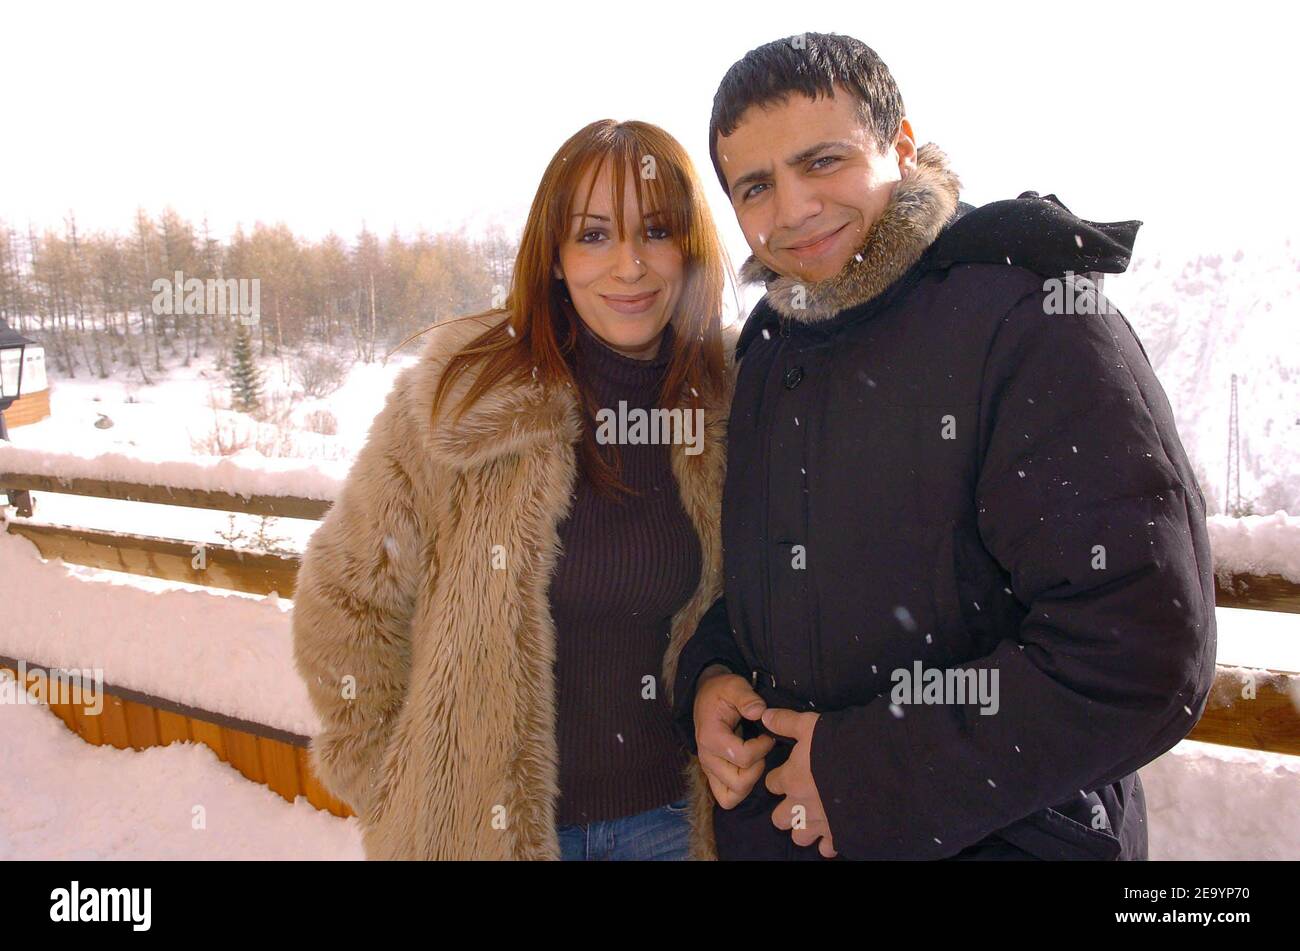 French rai singer and actor Faudel poses with his girlfriend Anissa at a photocall for his movie 'Bab El Web' directed by Merzak Allouache during the 'Festival du Film de Comedie' in l'Alpe d'Huez, France on January 19, 2005. Photo by Bruno Klein/ABACA Stock Photo